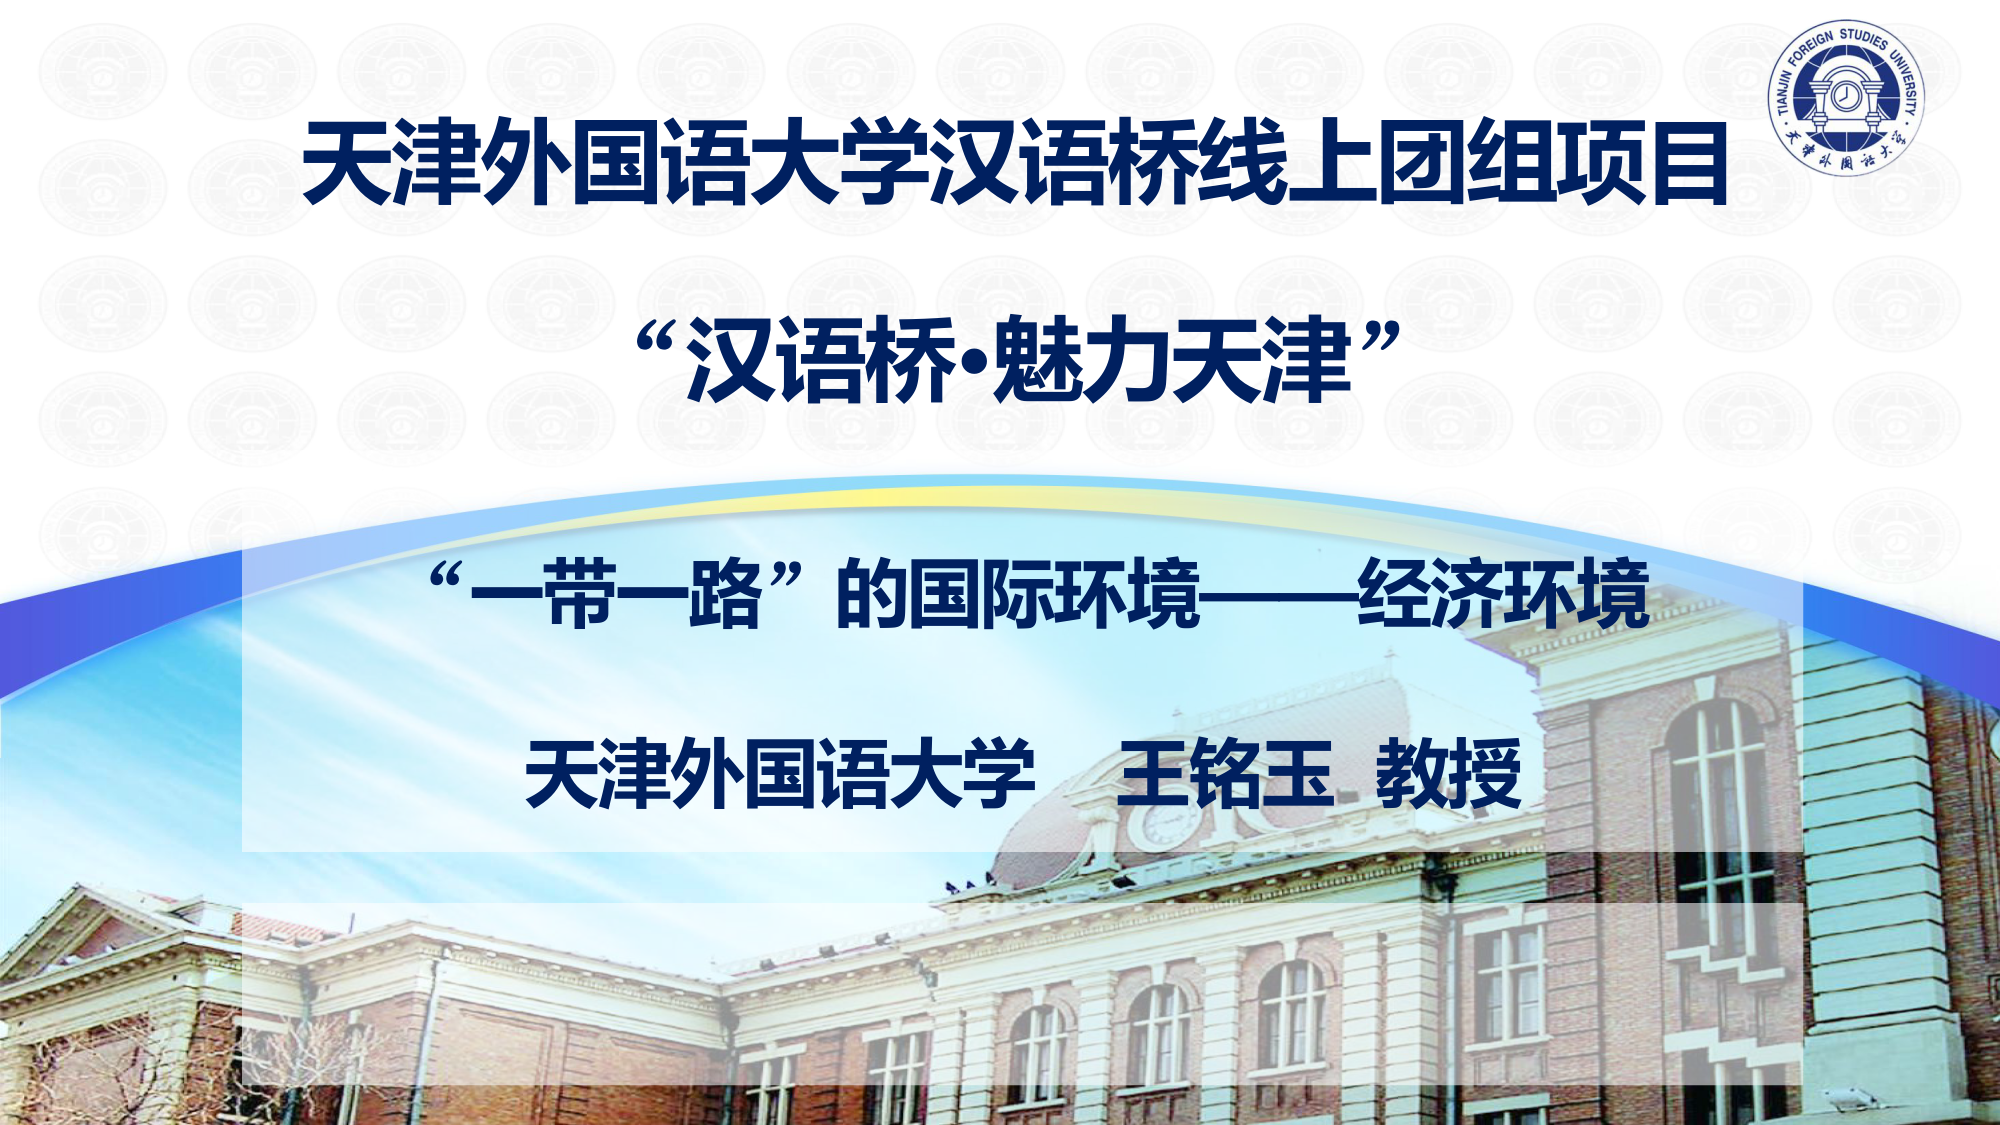 The international environment of The Initiative “Belt and Road”---- Economic environment Professor Wang Mingyu Tianjin Foreign Studies University